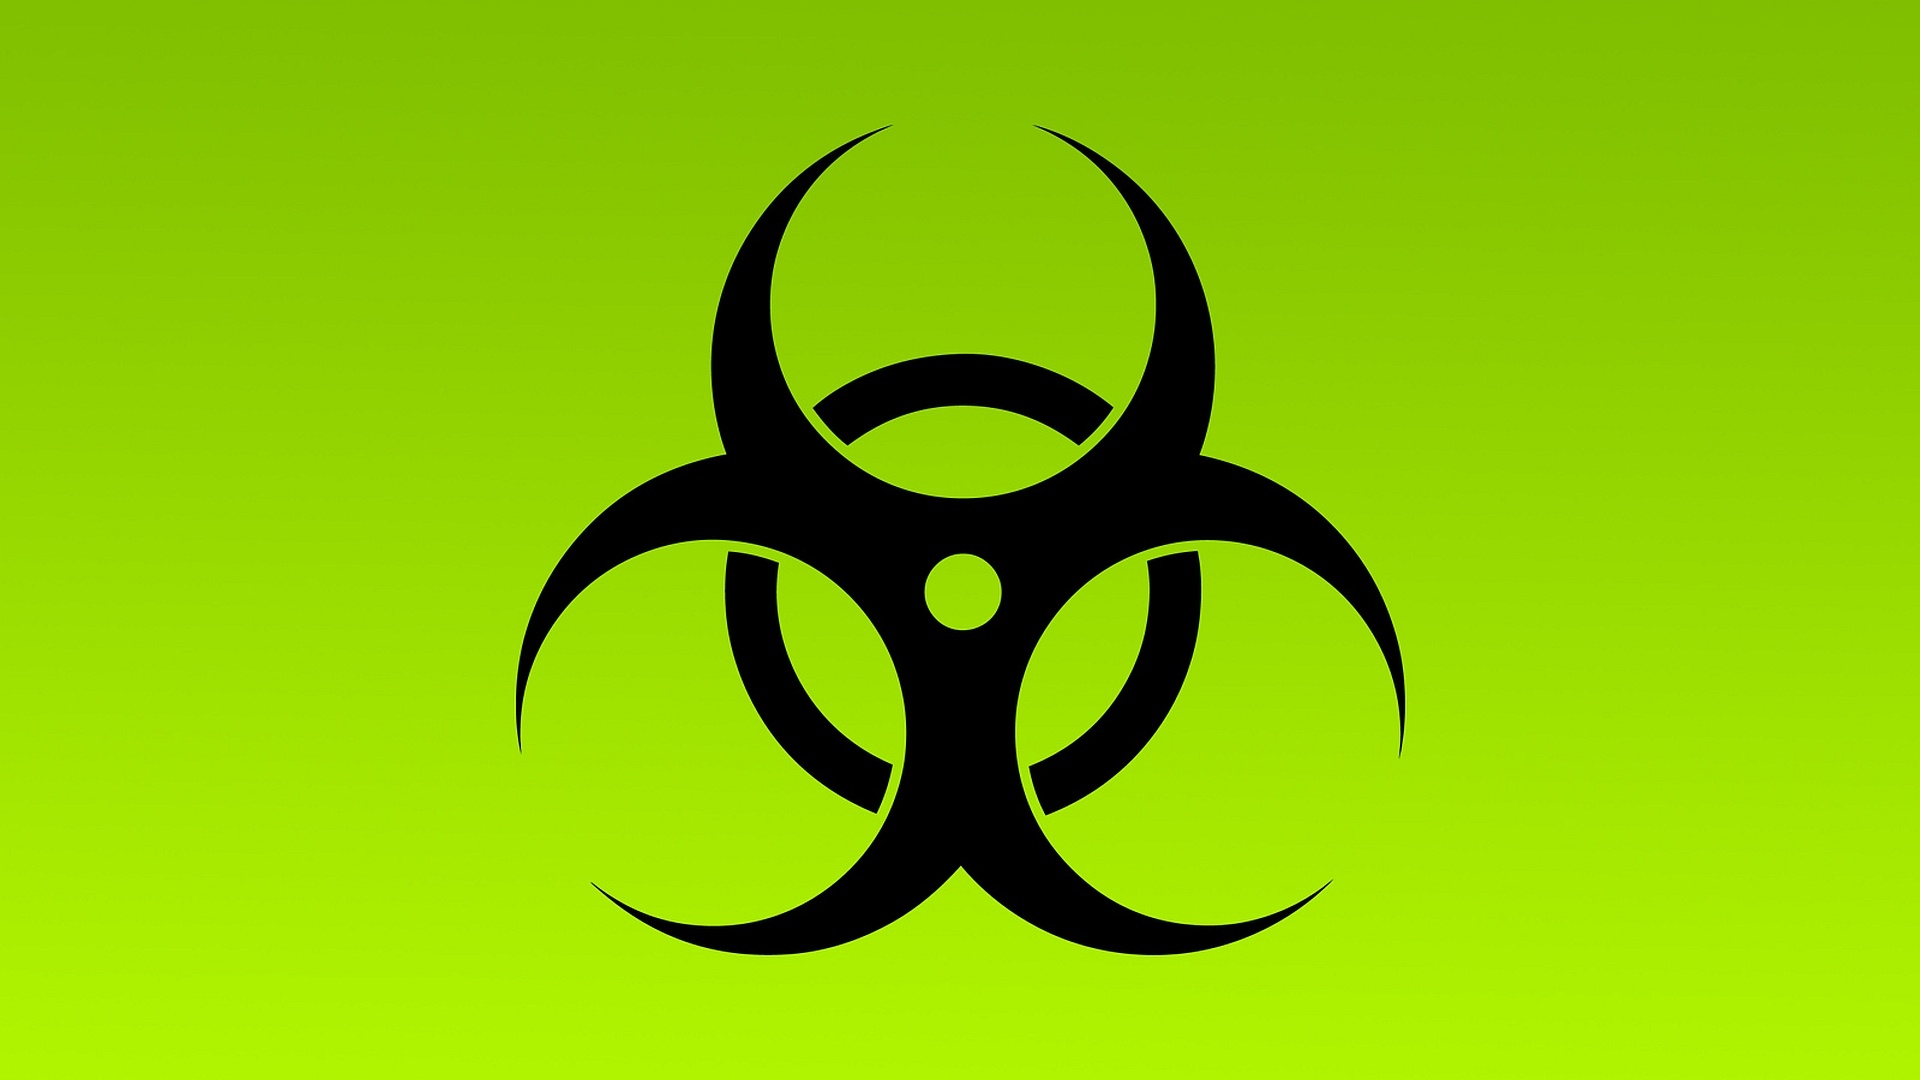 Green Biohazard: A warning, developed in 1966 by Charles Baldwin, an environmental-health engineer working for TDCC. 1920x1080 Full HD Wallpaper.